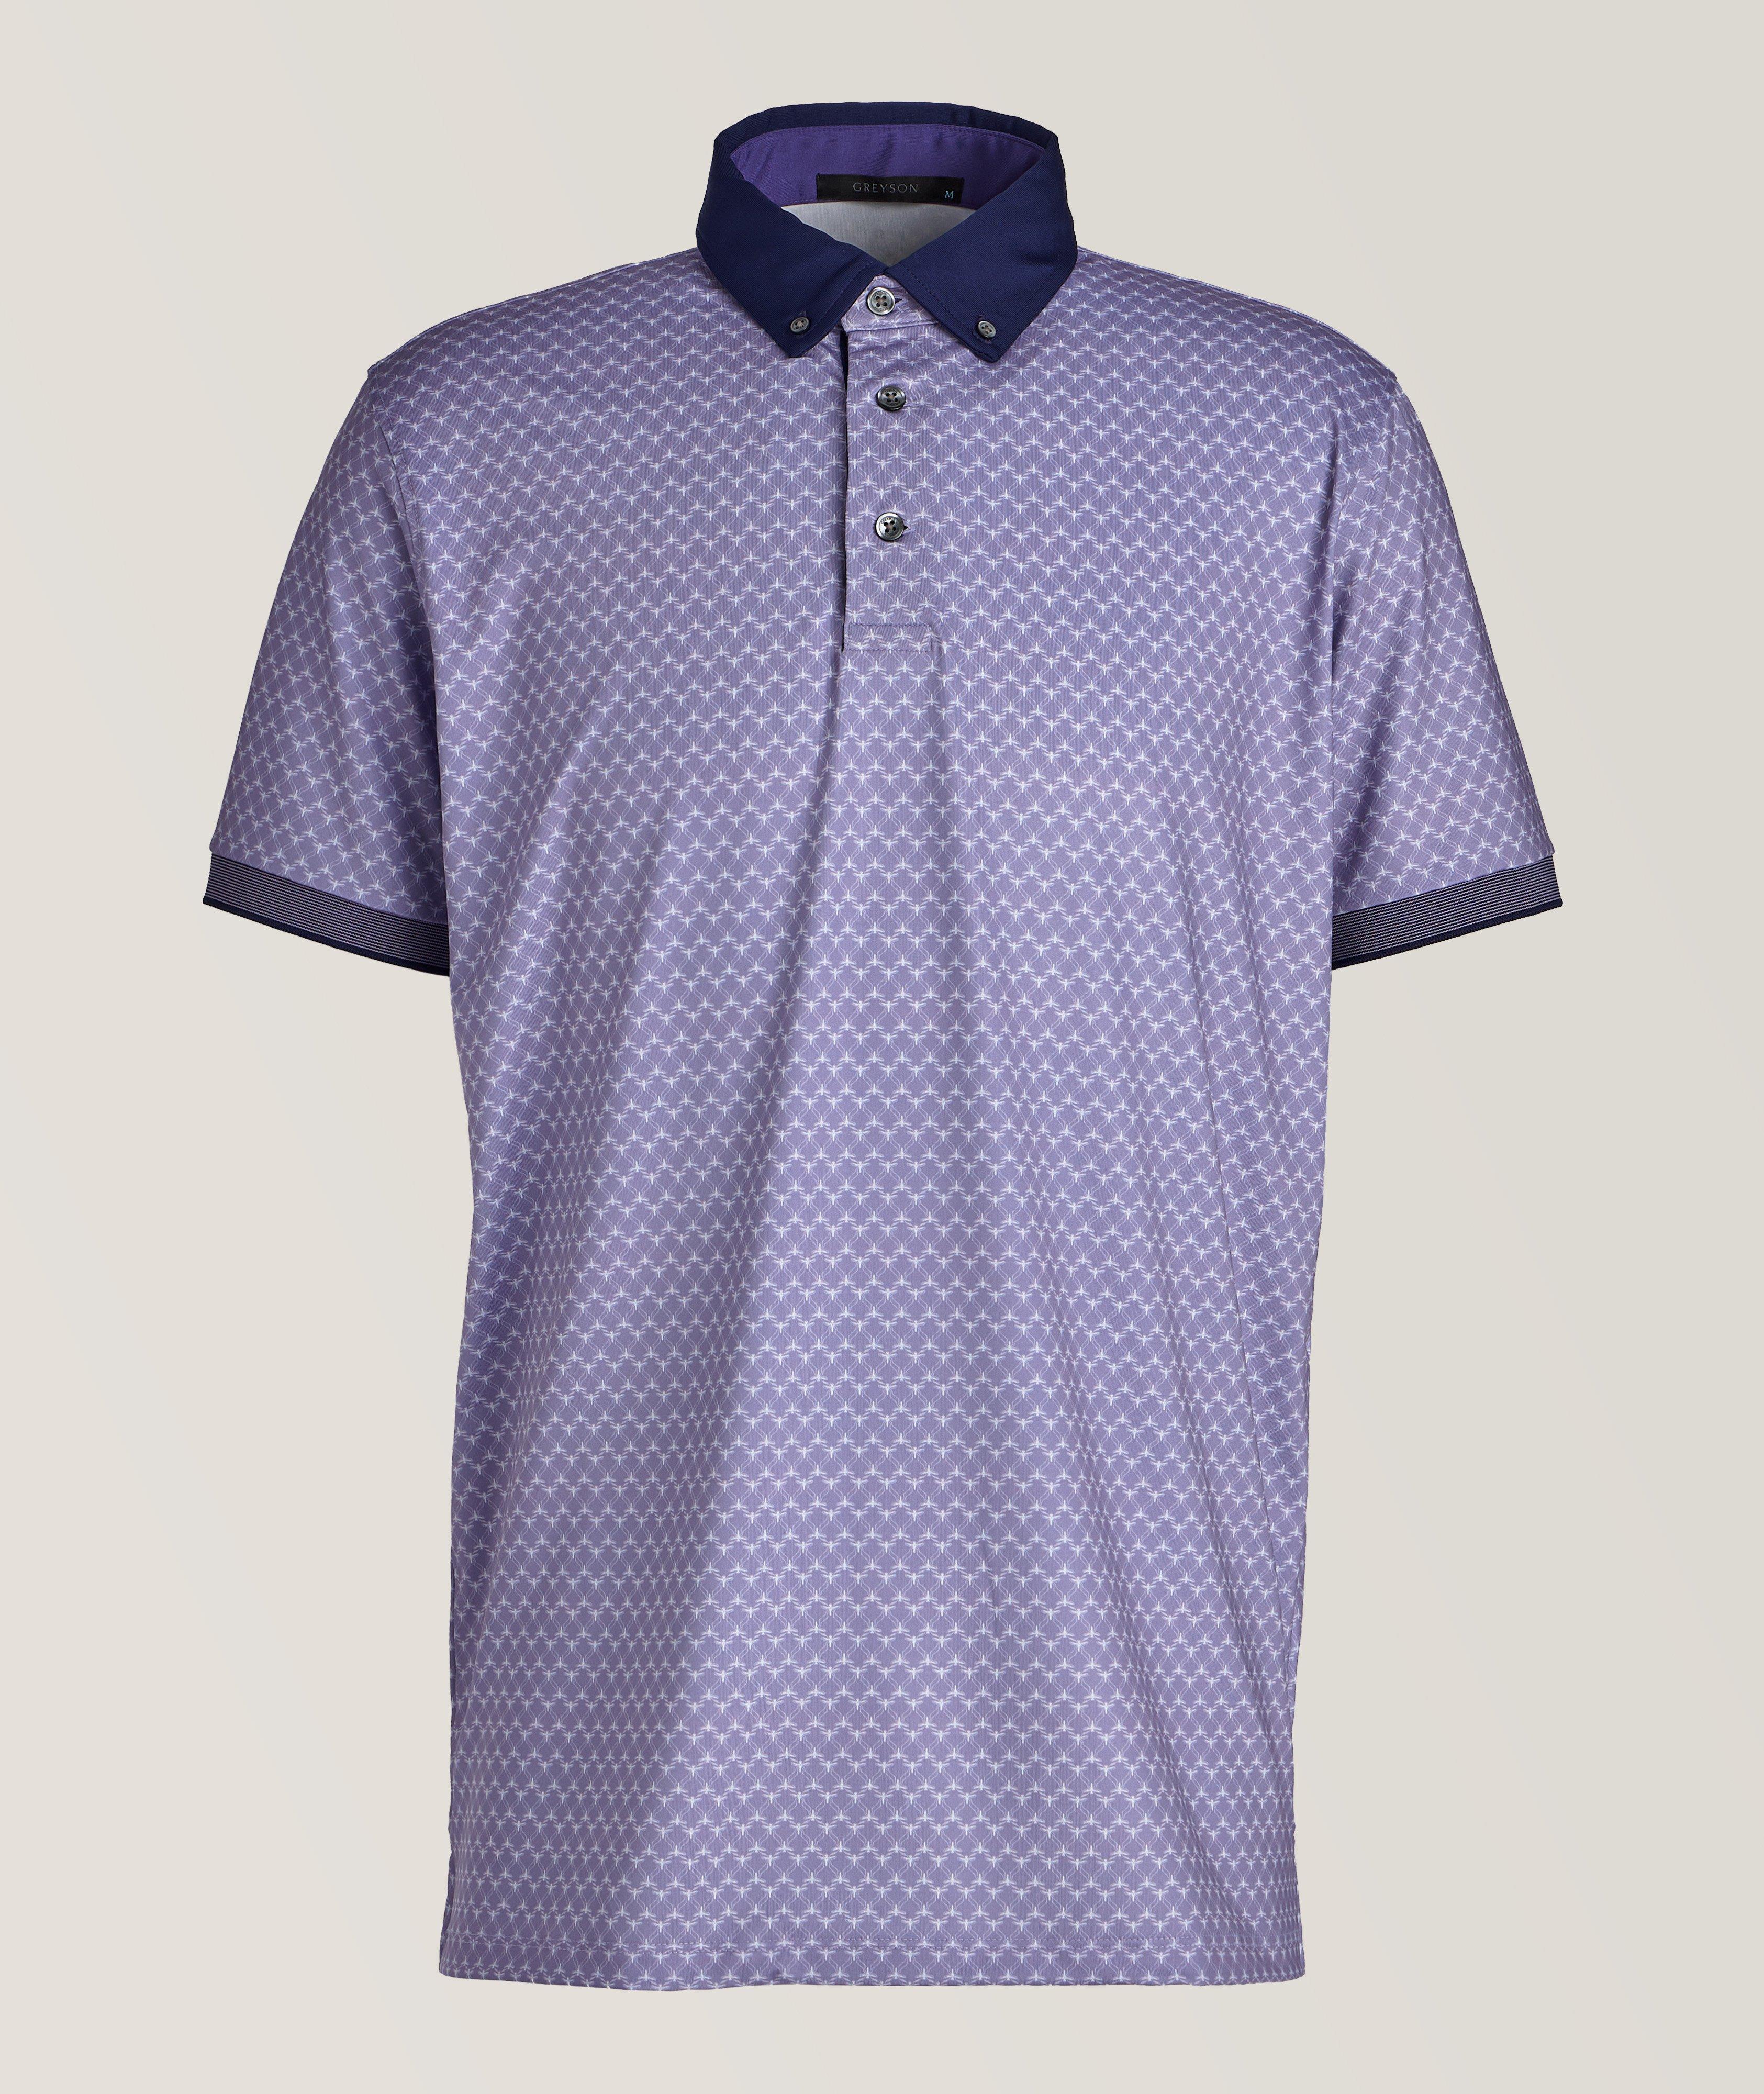 Players Club Mosquito Prophesies Golf Polo